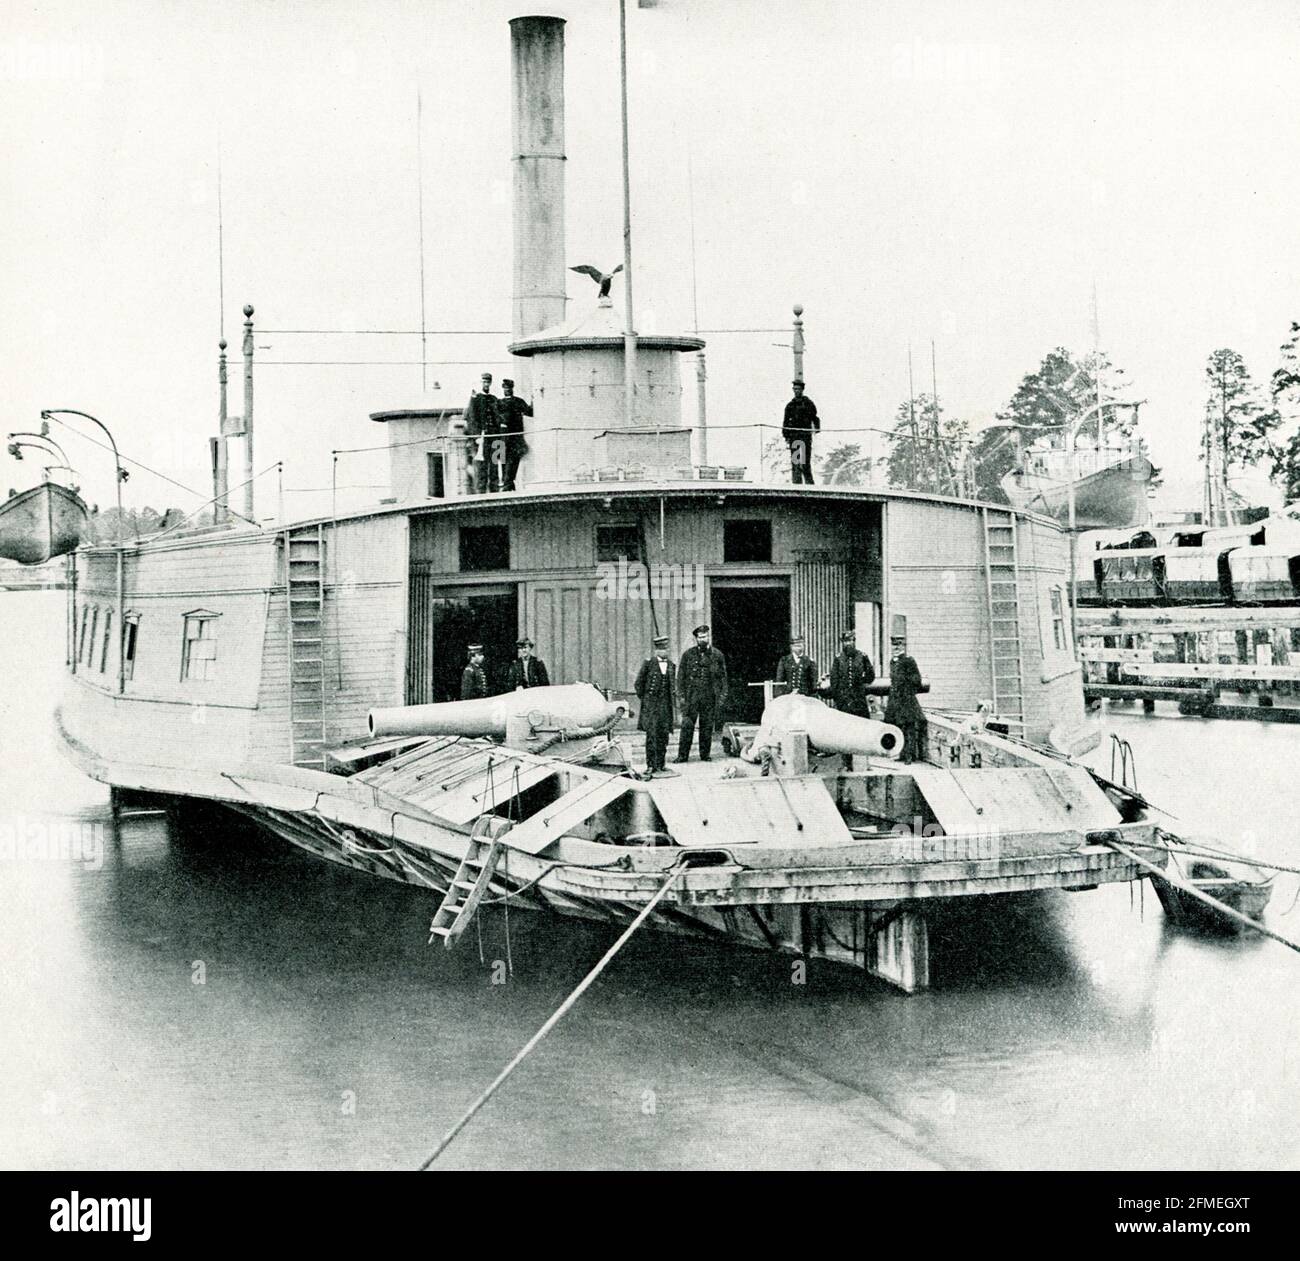 The 1912 caption reads: “The Commodore Perry - an old New York ferryboat became emergency gun boat  - has guns and pilot-houses armored with casement of iron plates for gunners.” The Commodore Perry (1858) was a 512 long tons (520 t) steamer acquired by the Union Navy during the first year of the American Civil War. Commodore Perry was outfitted as a gunboat with heavy guns and a large crew of 125 officers and enlisted personnel. Her powerful guns were capable of doing considerable damage to blockade runners or shore fortifications of the Confederate States of America. Stock Photo